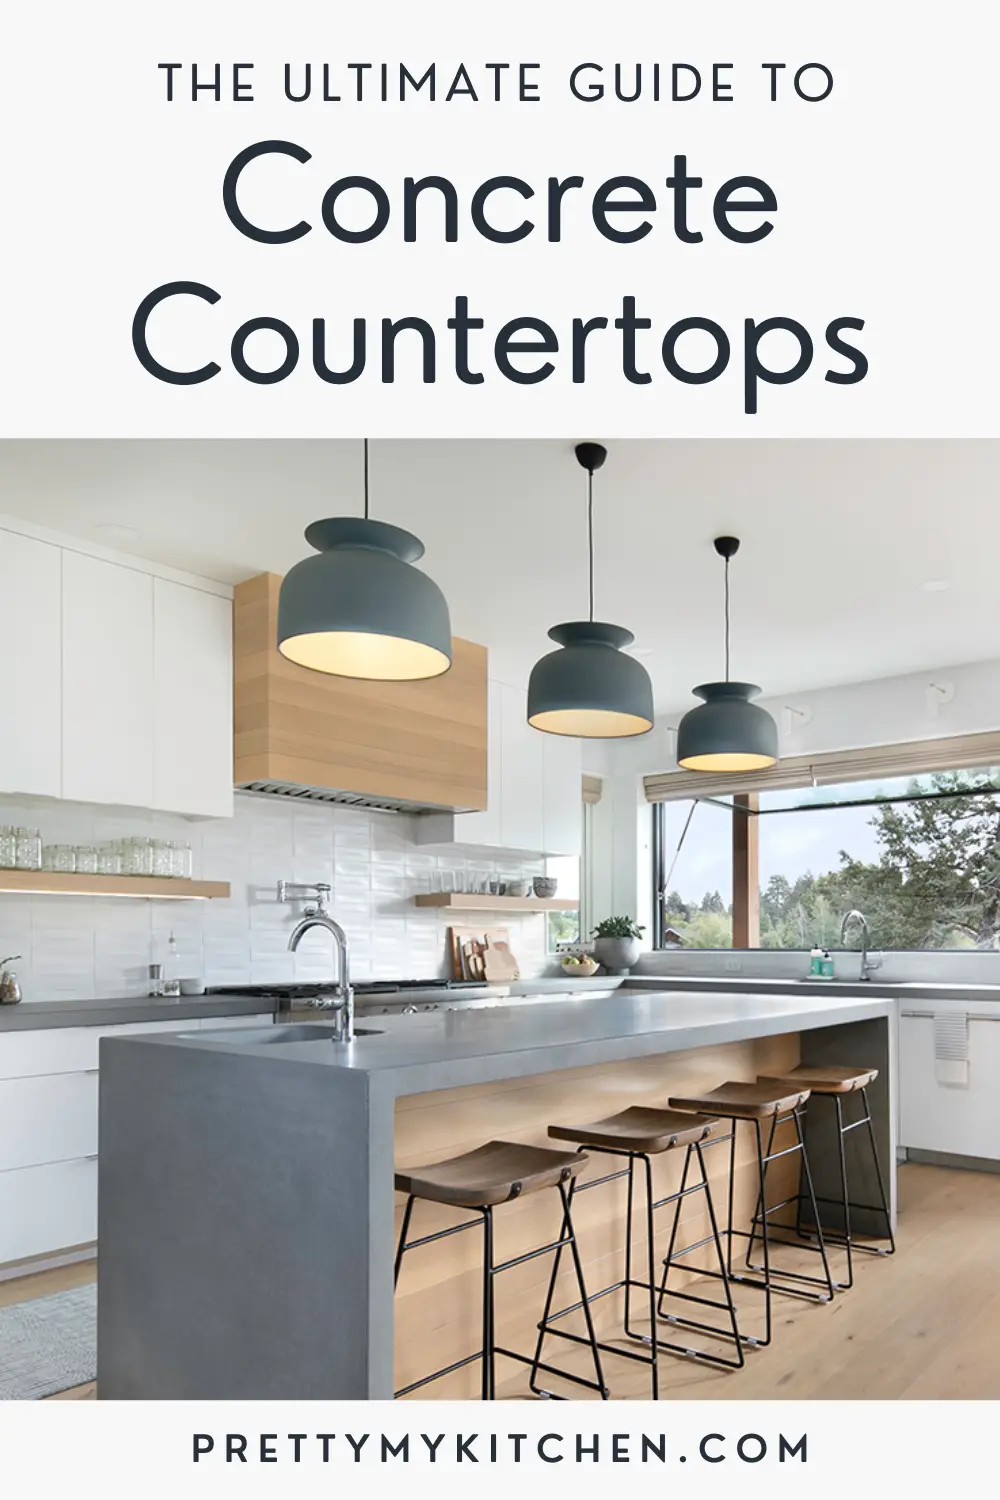 The ultimate guide to concrete countertops for your kitchen